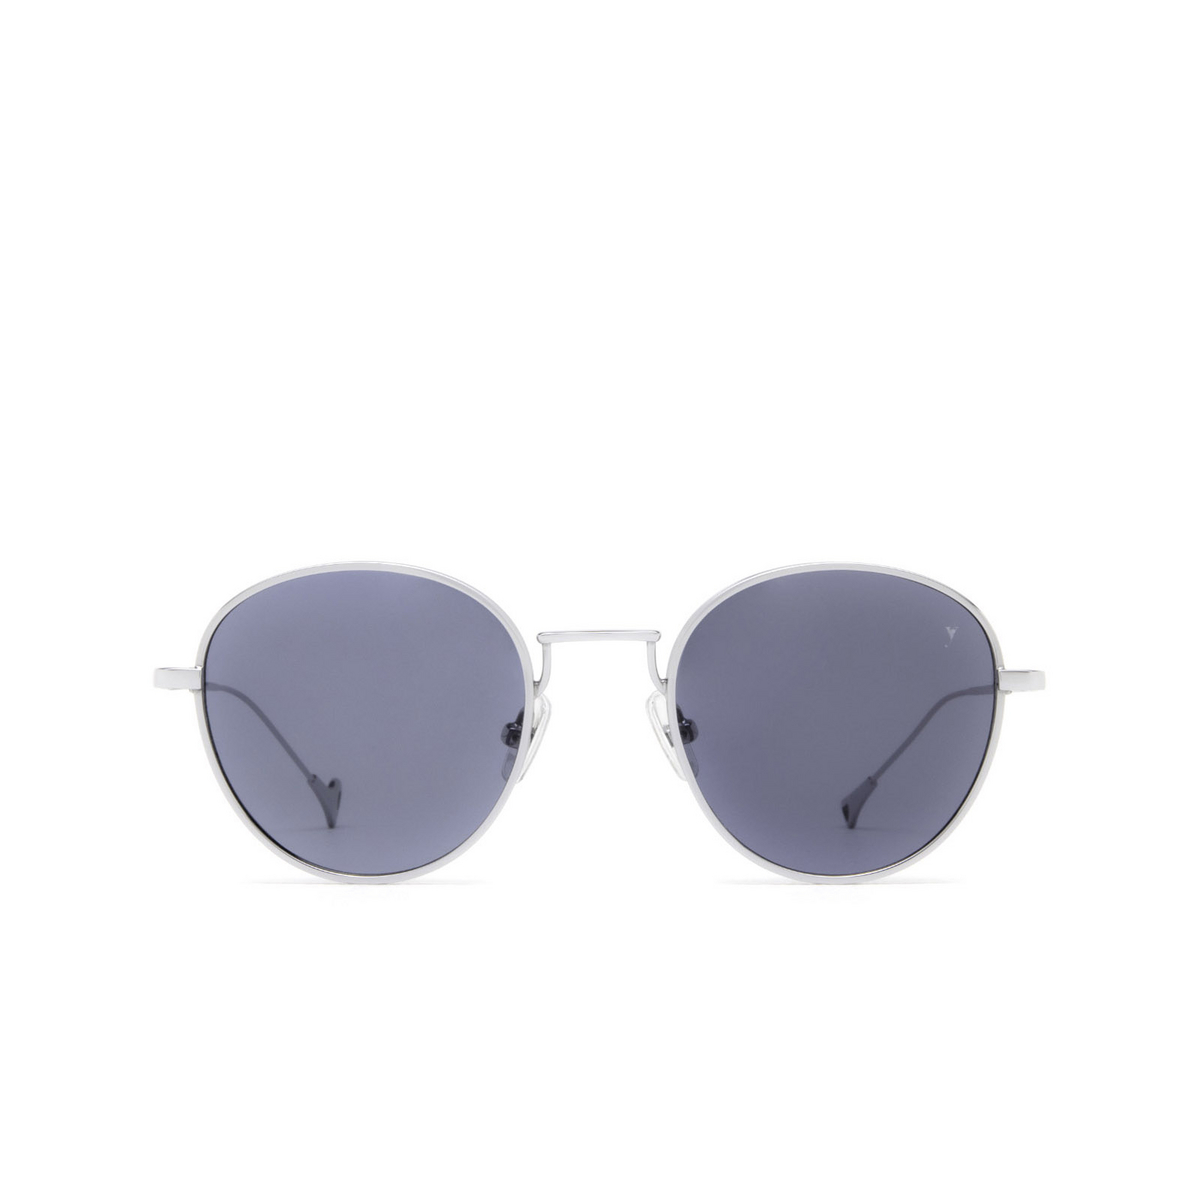 Eyepetizer ALEN Sunglasses C.1-39 Silver - front view